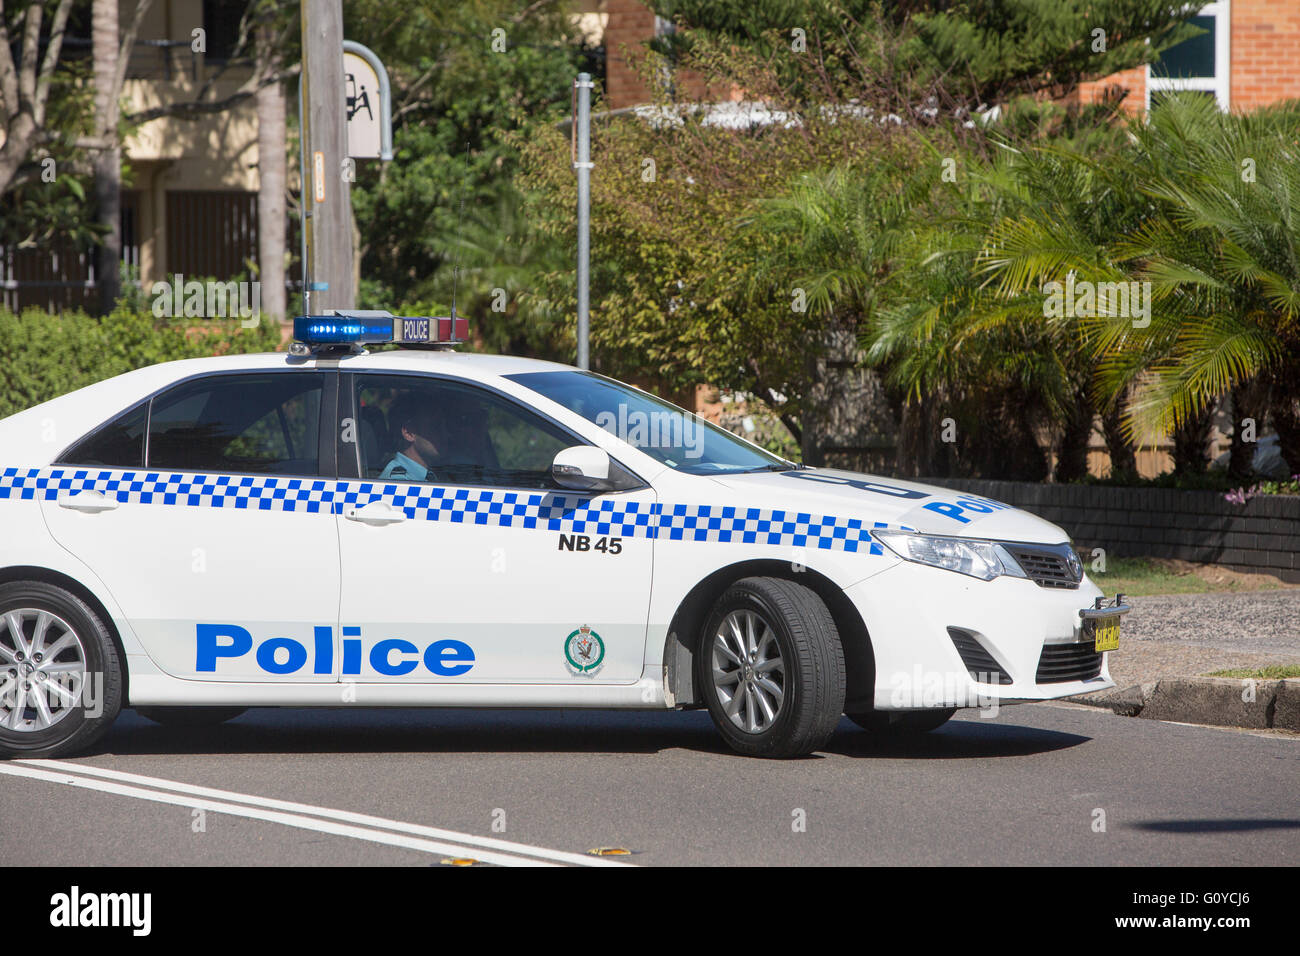 Police officer driving new south wales police car in Sydney, Australia Stock Photo